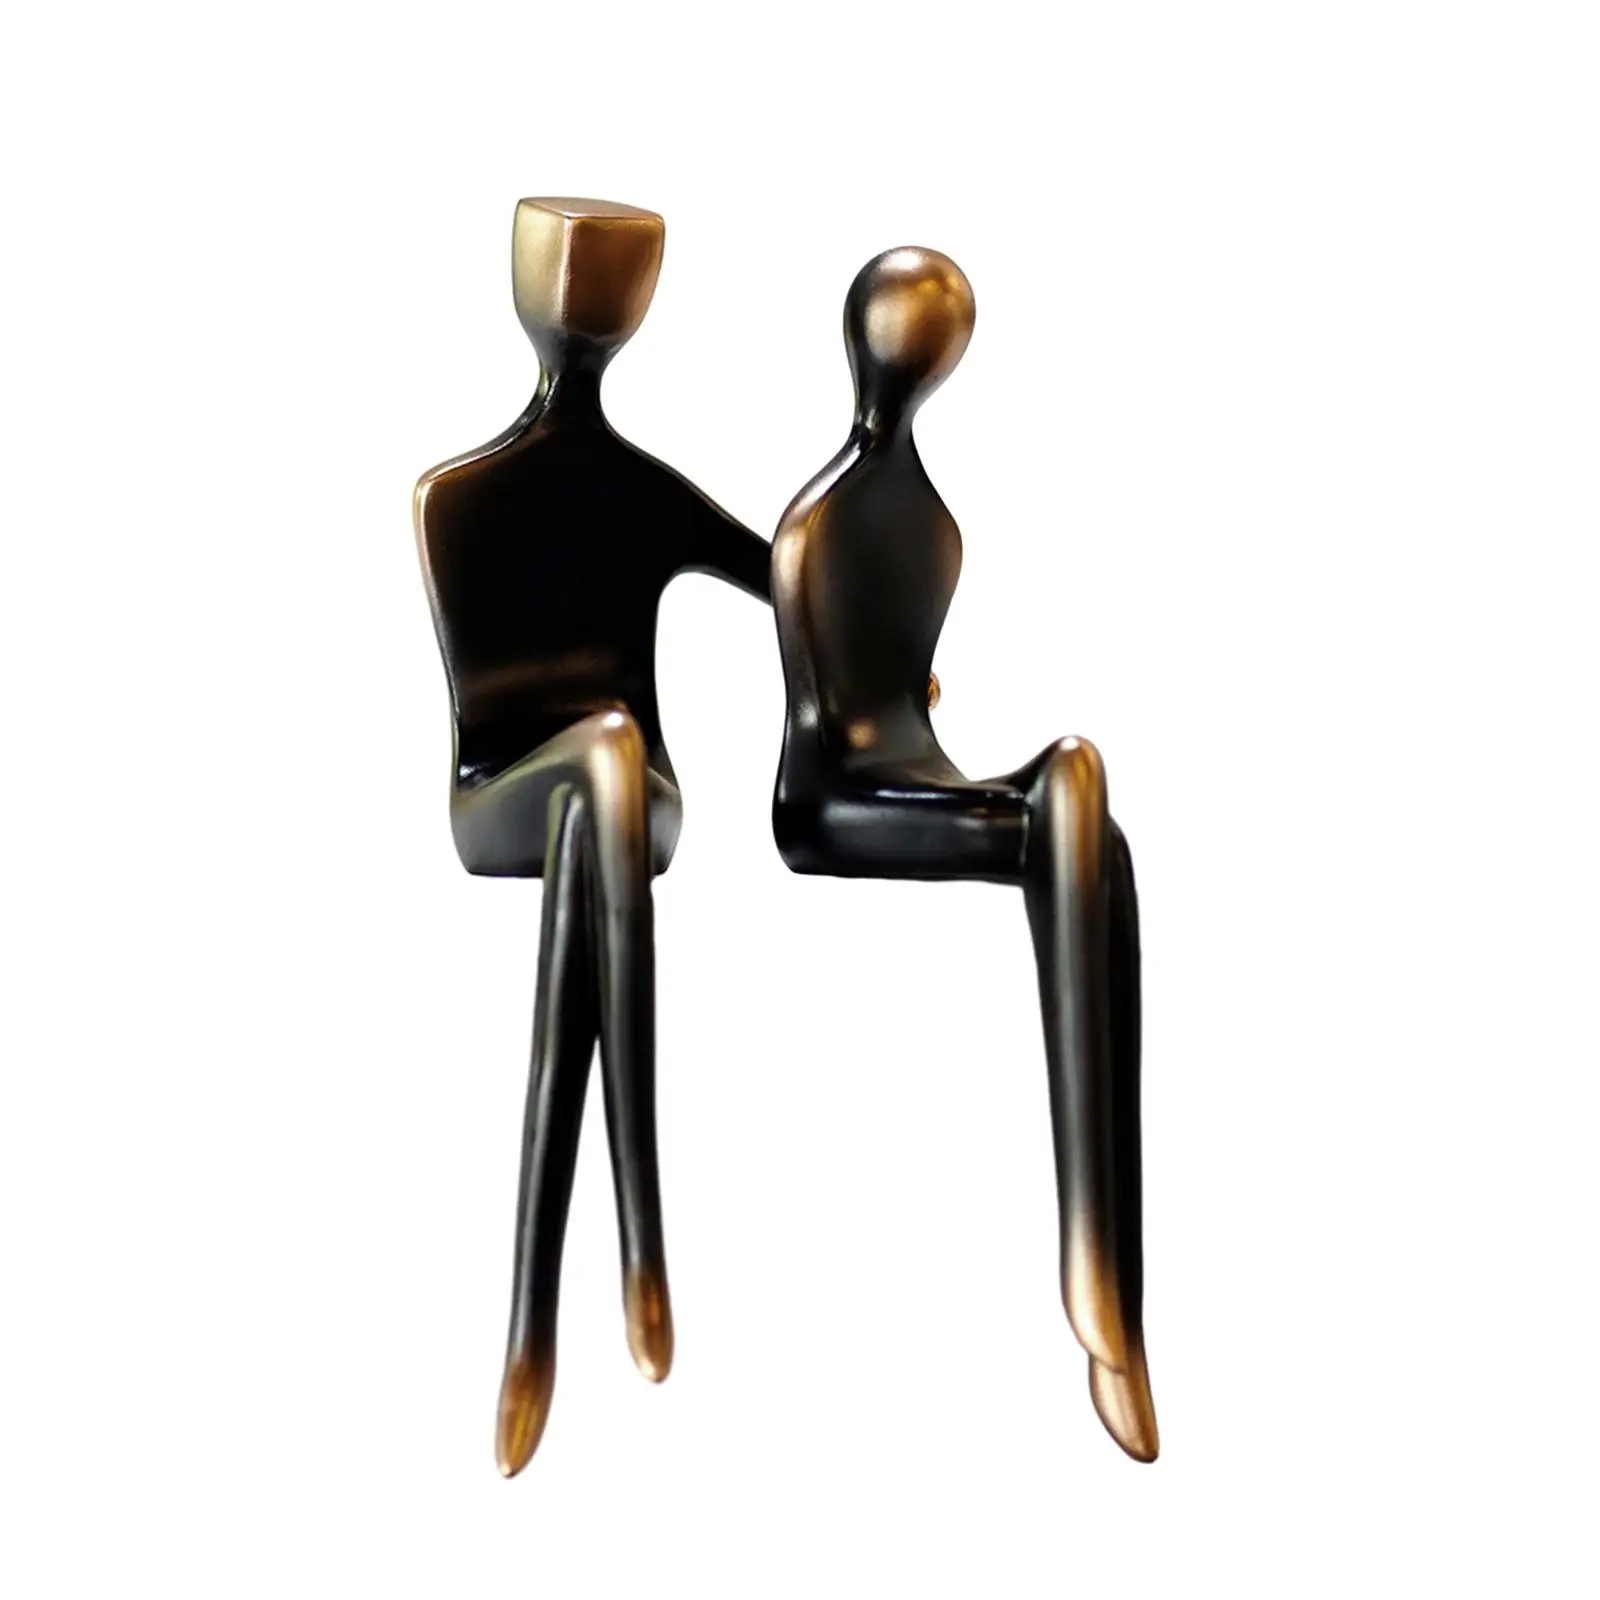 Abstract Art Figurine Handcraft Nordic Style Couple Sculpture for Living Room Cabinet Office Table Centerpiece Decoration